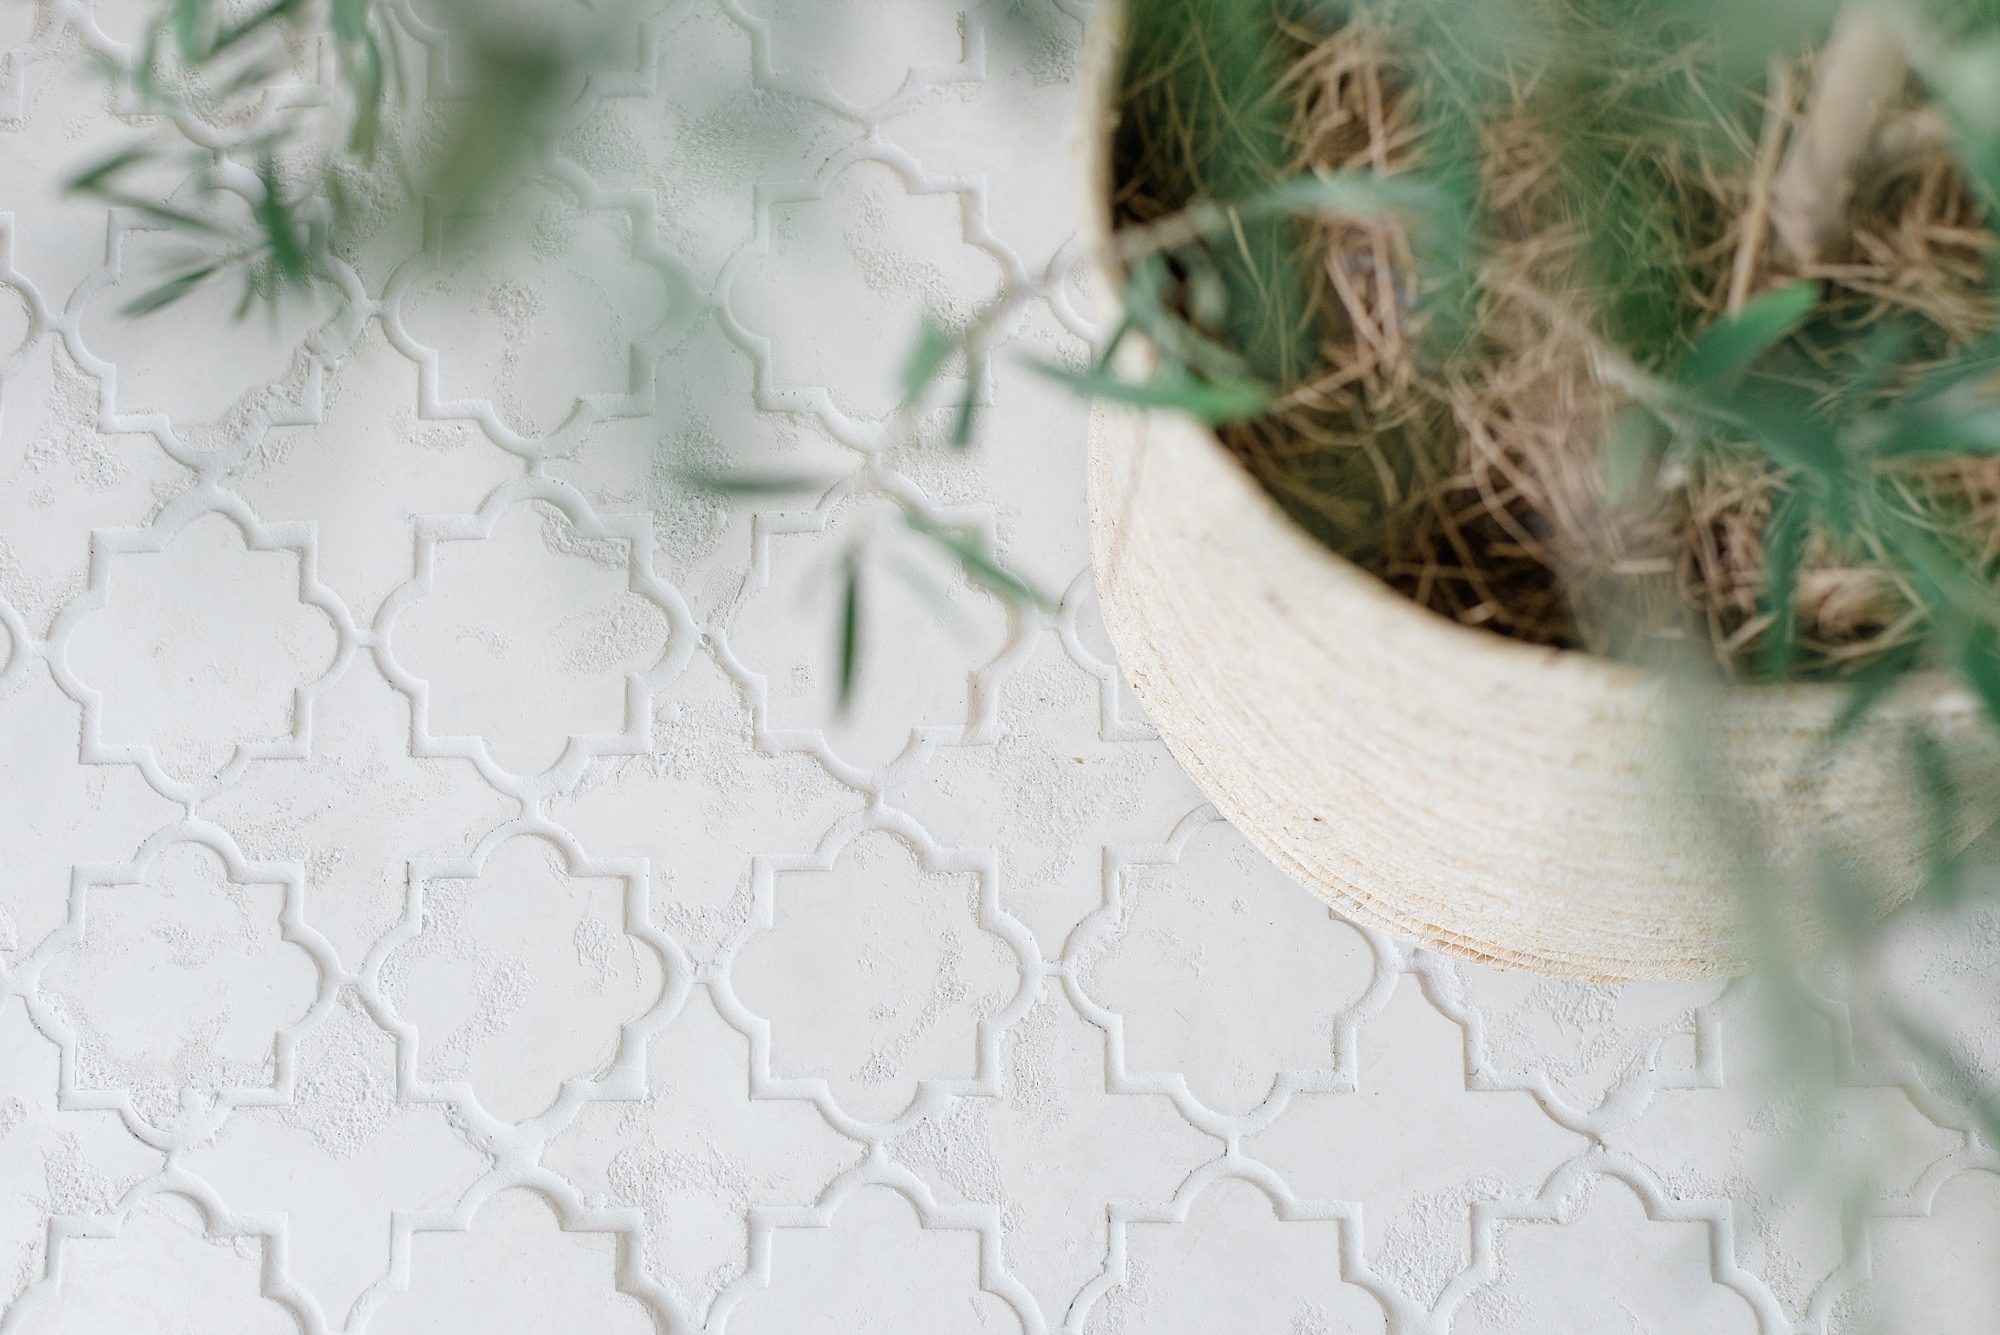 white tile in geometric shapes